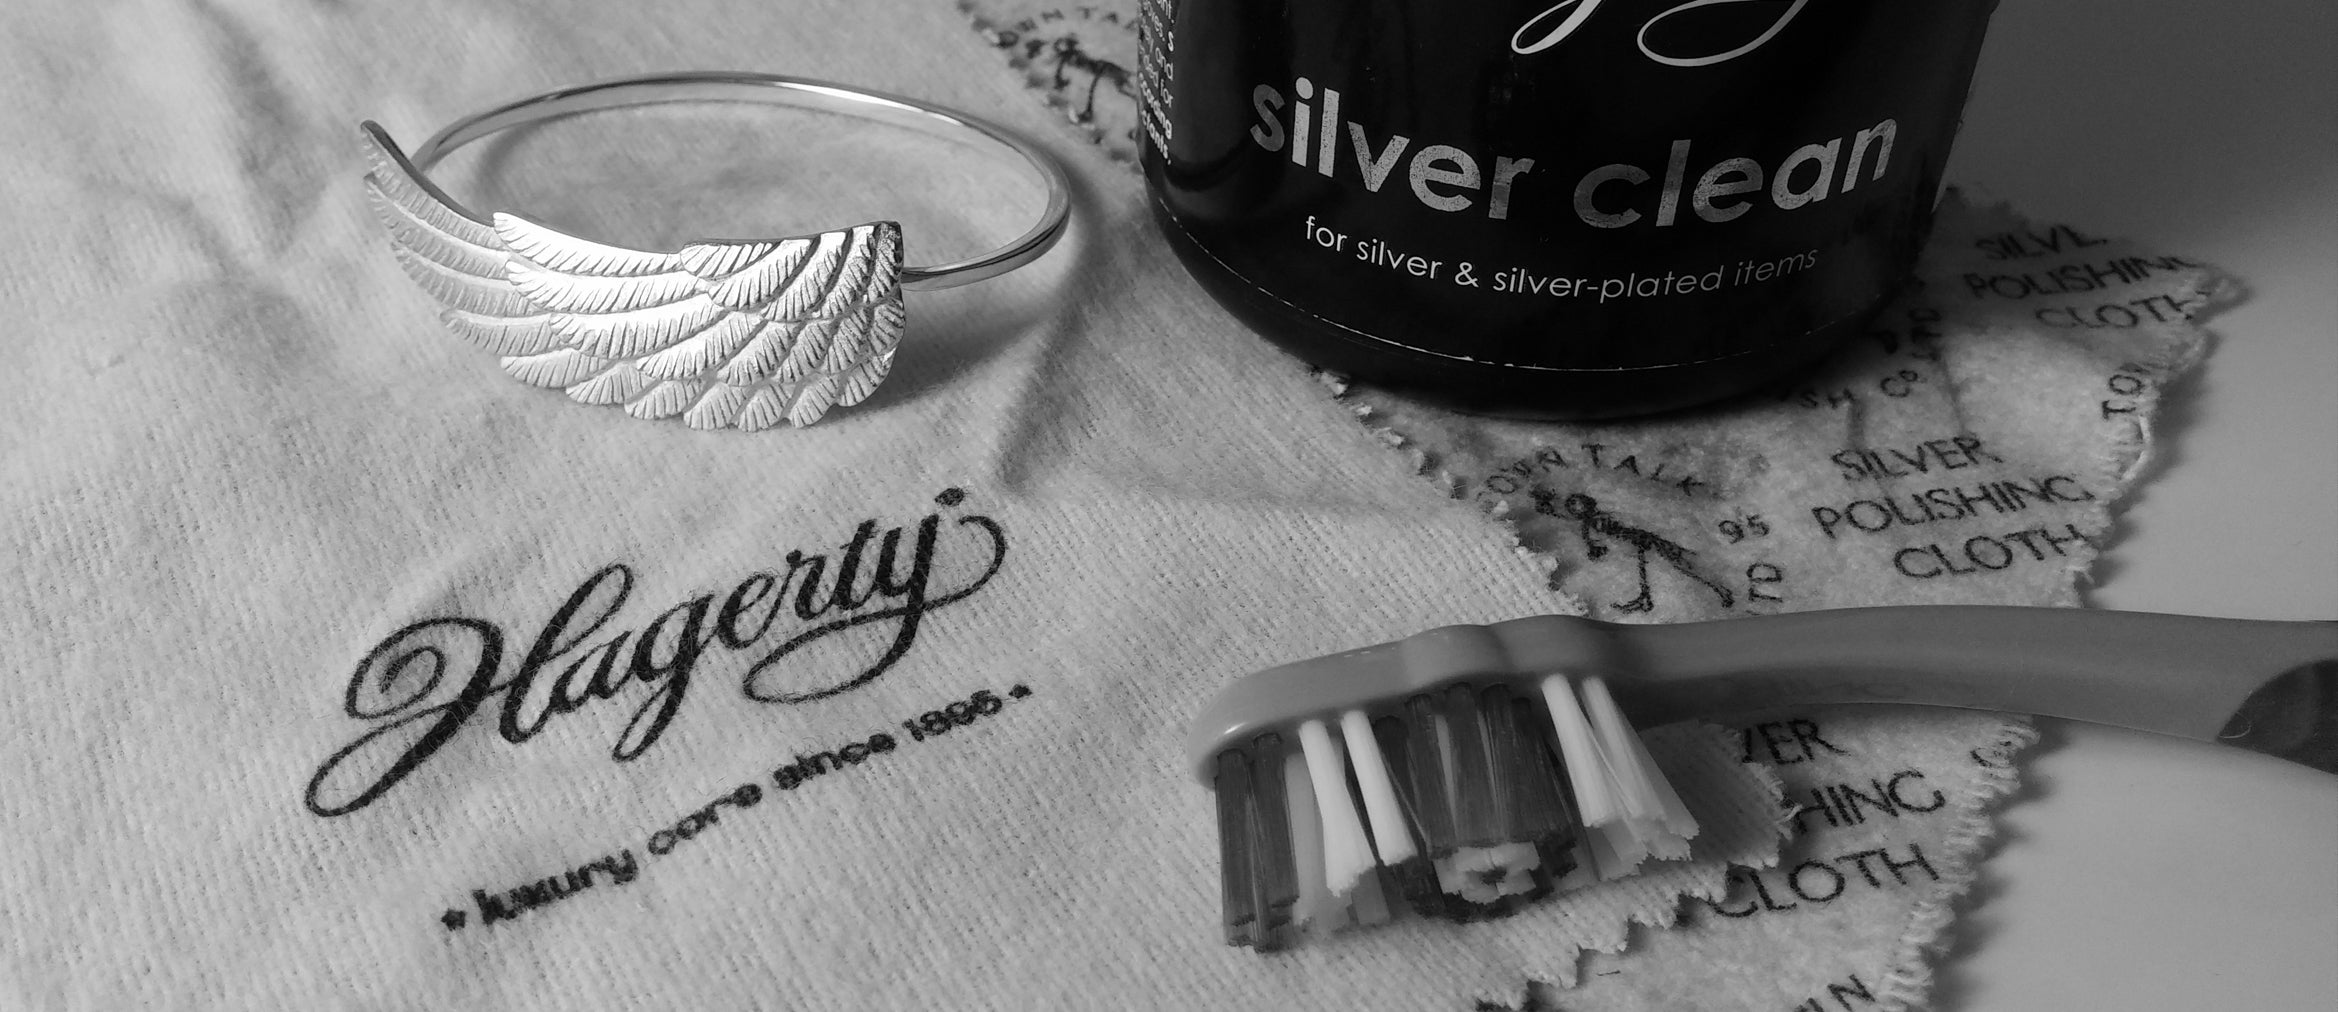 silver bangle and cleaning products